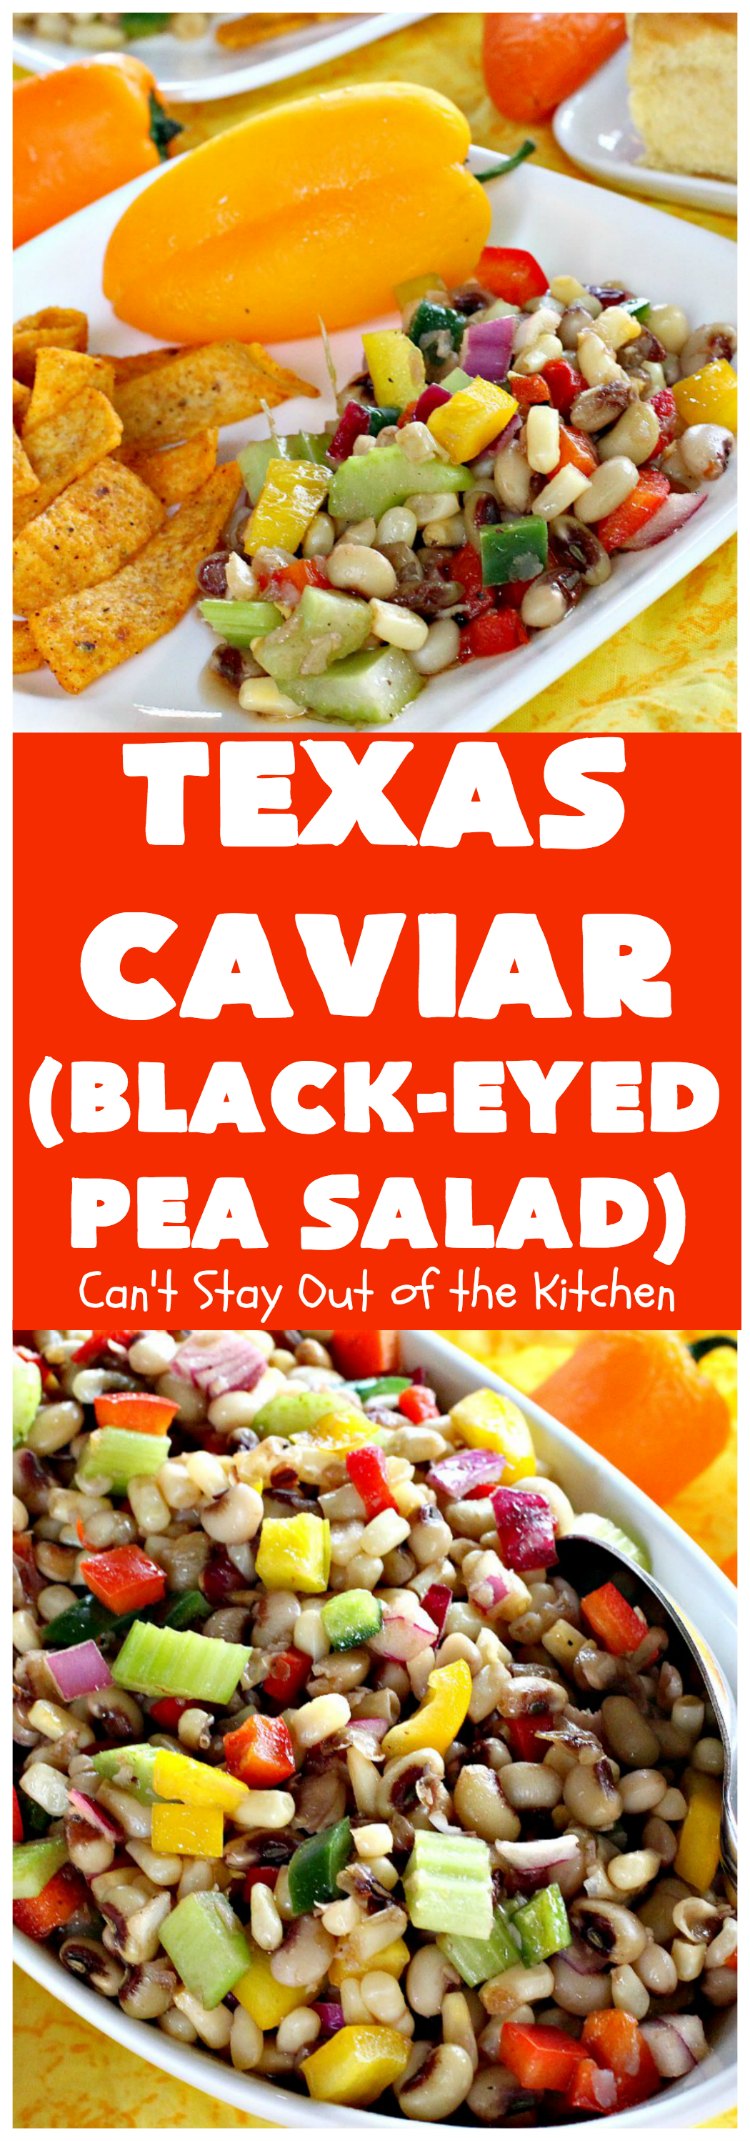 Texas Caviar Dip (Black-Eyed Peas Salad) | Can't Stay Out of the Kitchen